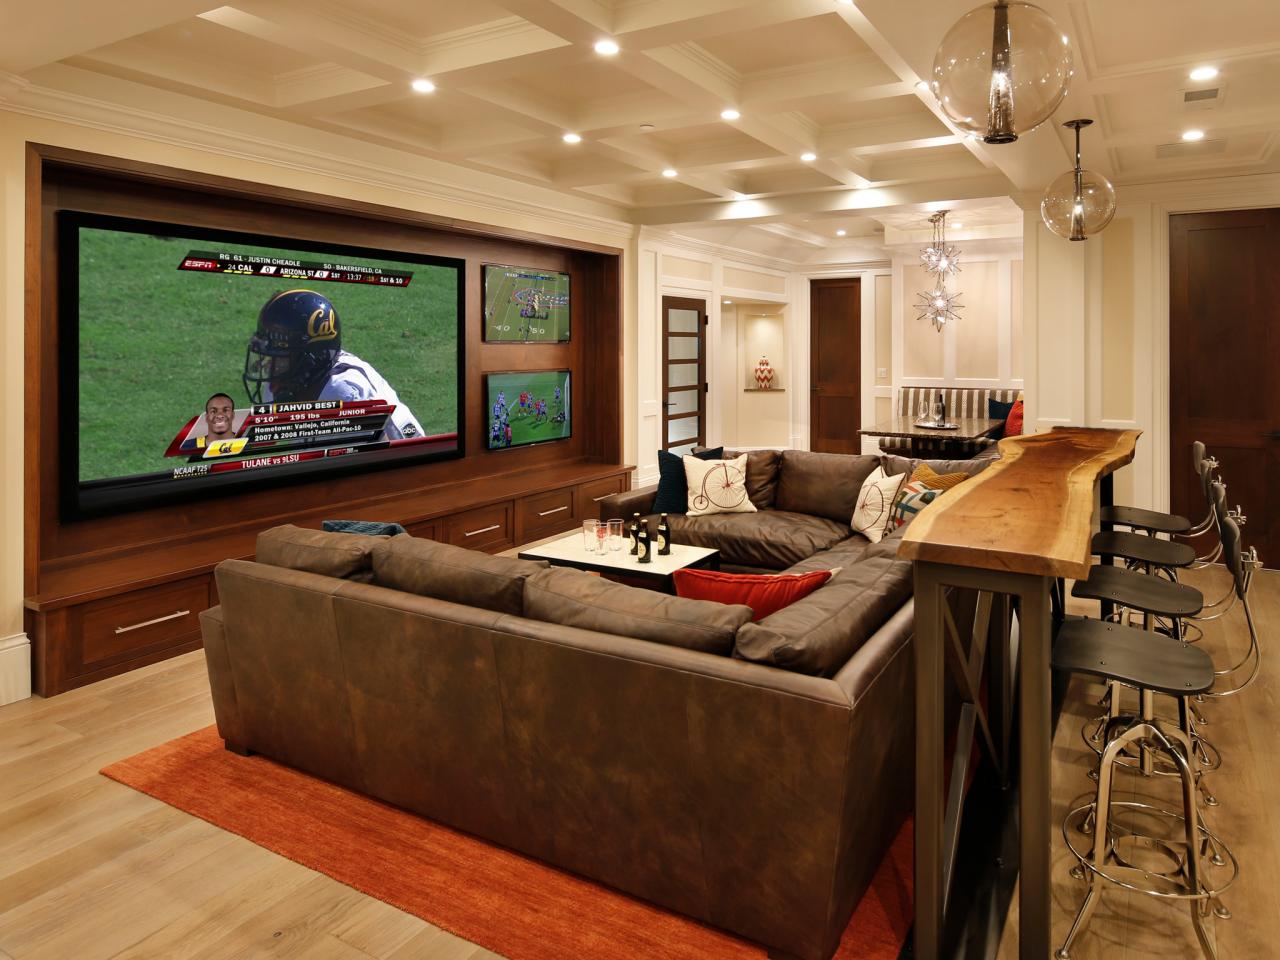 How Can I Remodel My Basement for Football Watching in Omaha?